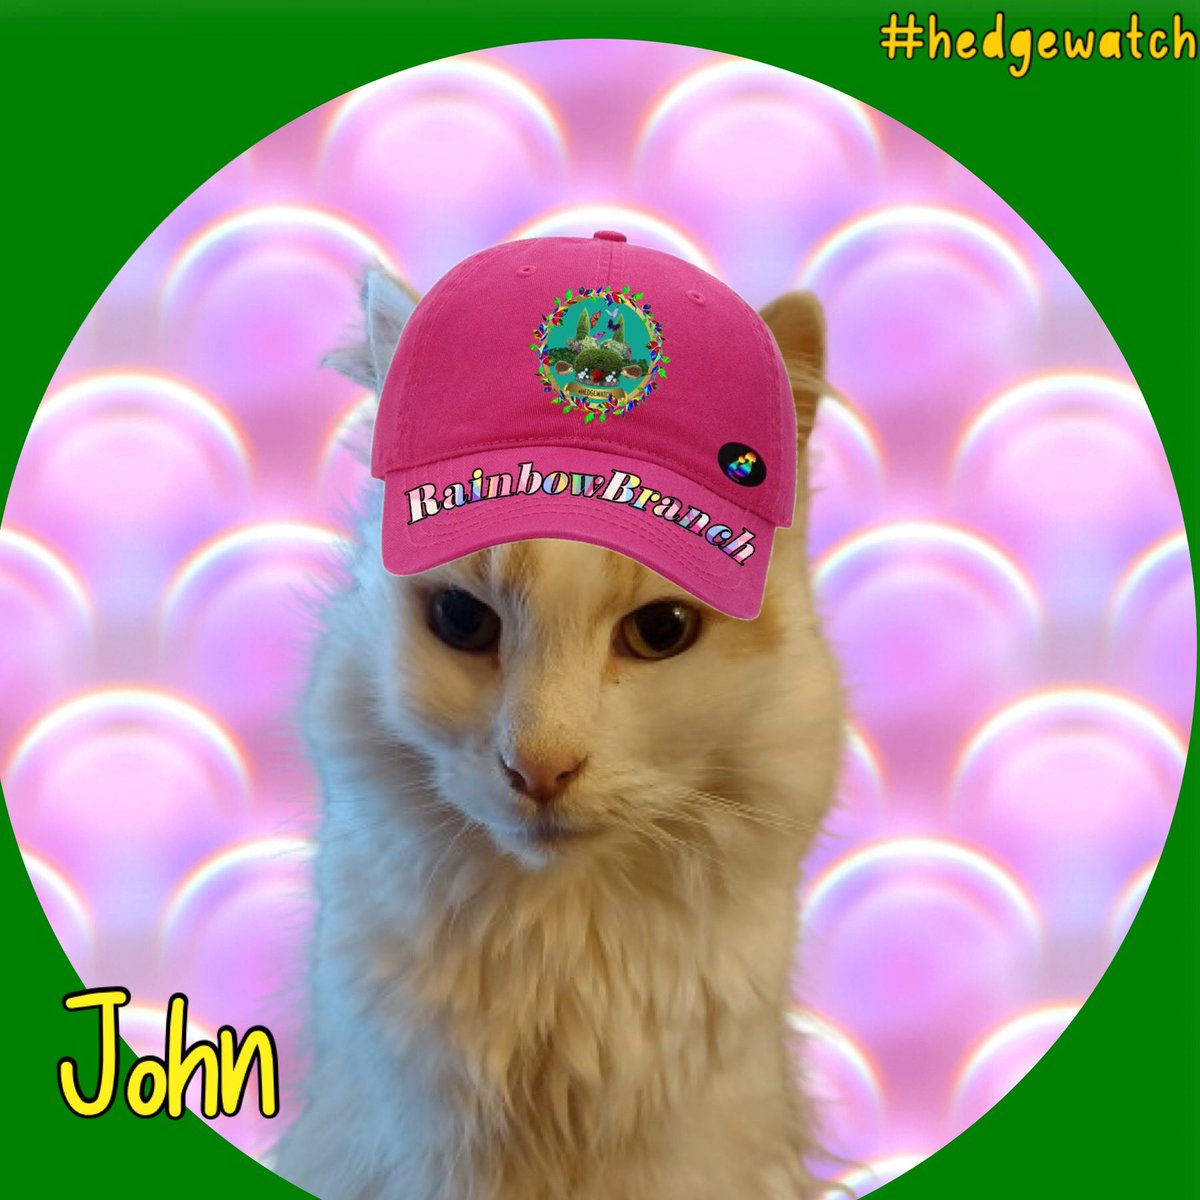 ✨Calling all Hedgewatchers 💖Please welcome John @fluffy_fam to the Rainbow Branch of #Hedgewatch John is now watching heavenly hedges with furends old & new OTRB🌈 He will always be loved and never forgotten ❤️